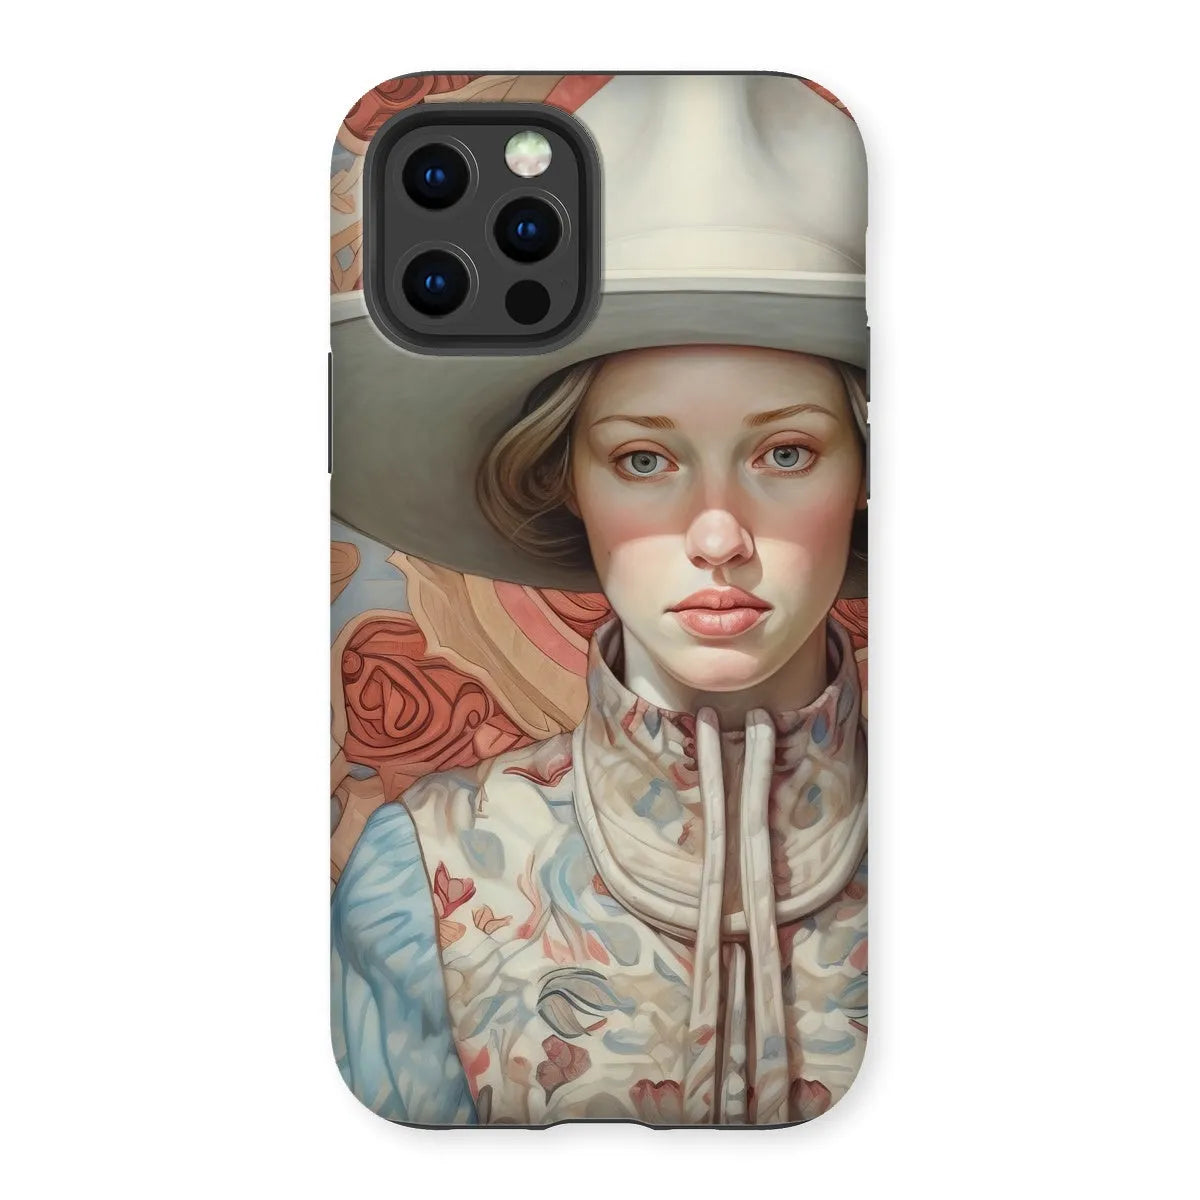 Lottie The Lesbian Cowgirl - Sapphic Art Phone Case - Iphone 12 Pro / Matte - Mobile Phone Cases - Aesthetic Art